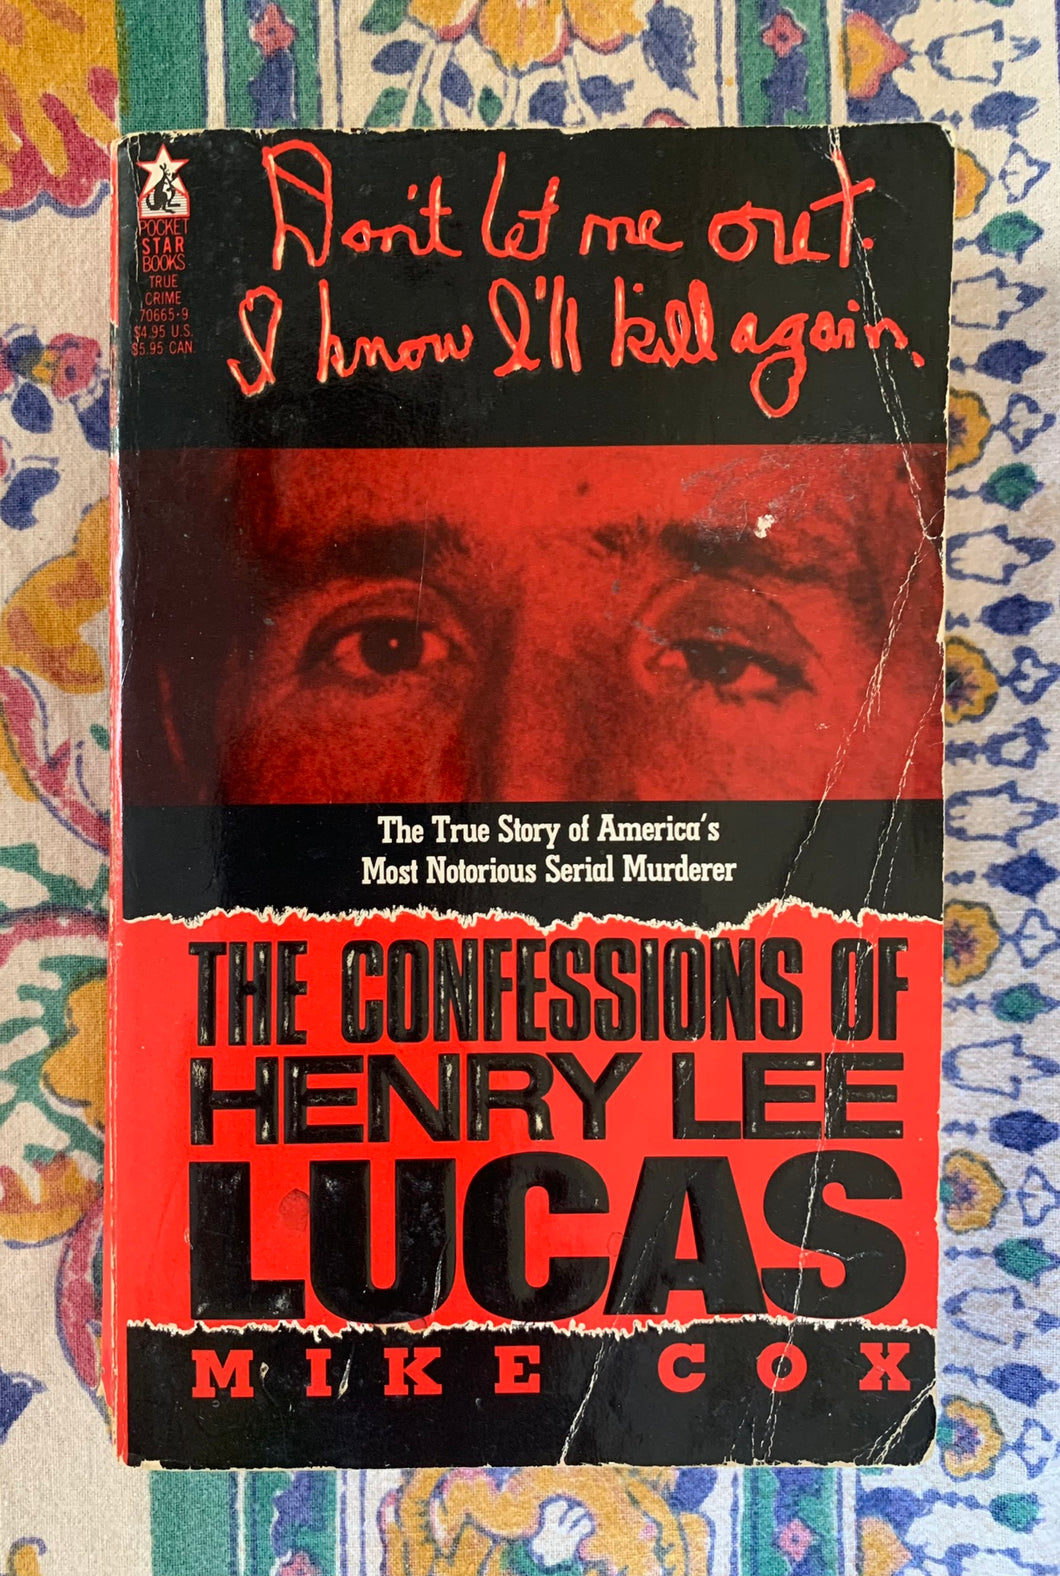 The Confessions of Henry Lee Lucas: The True Story of America's Most Notorious Serial Murderer